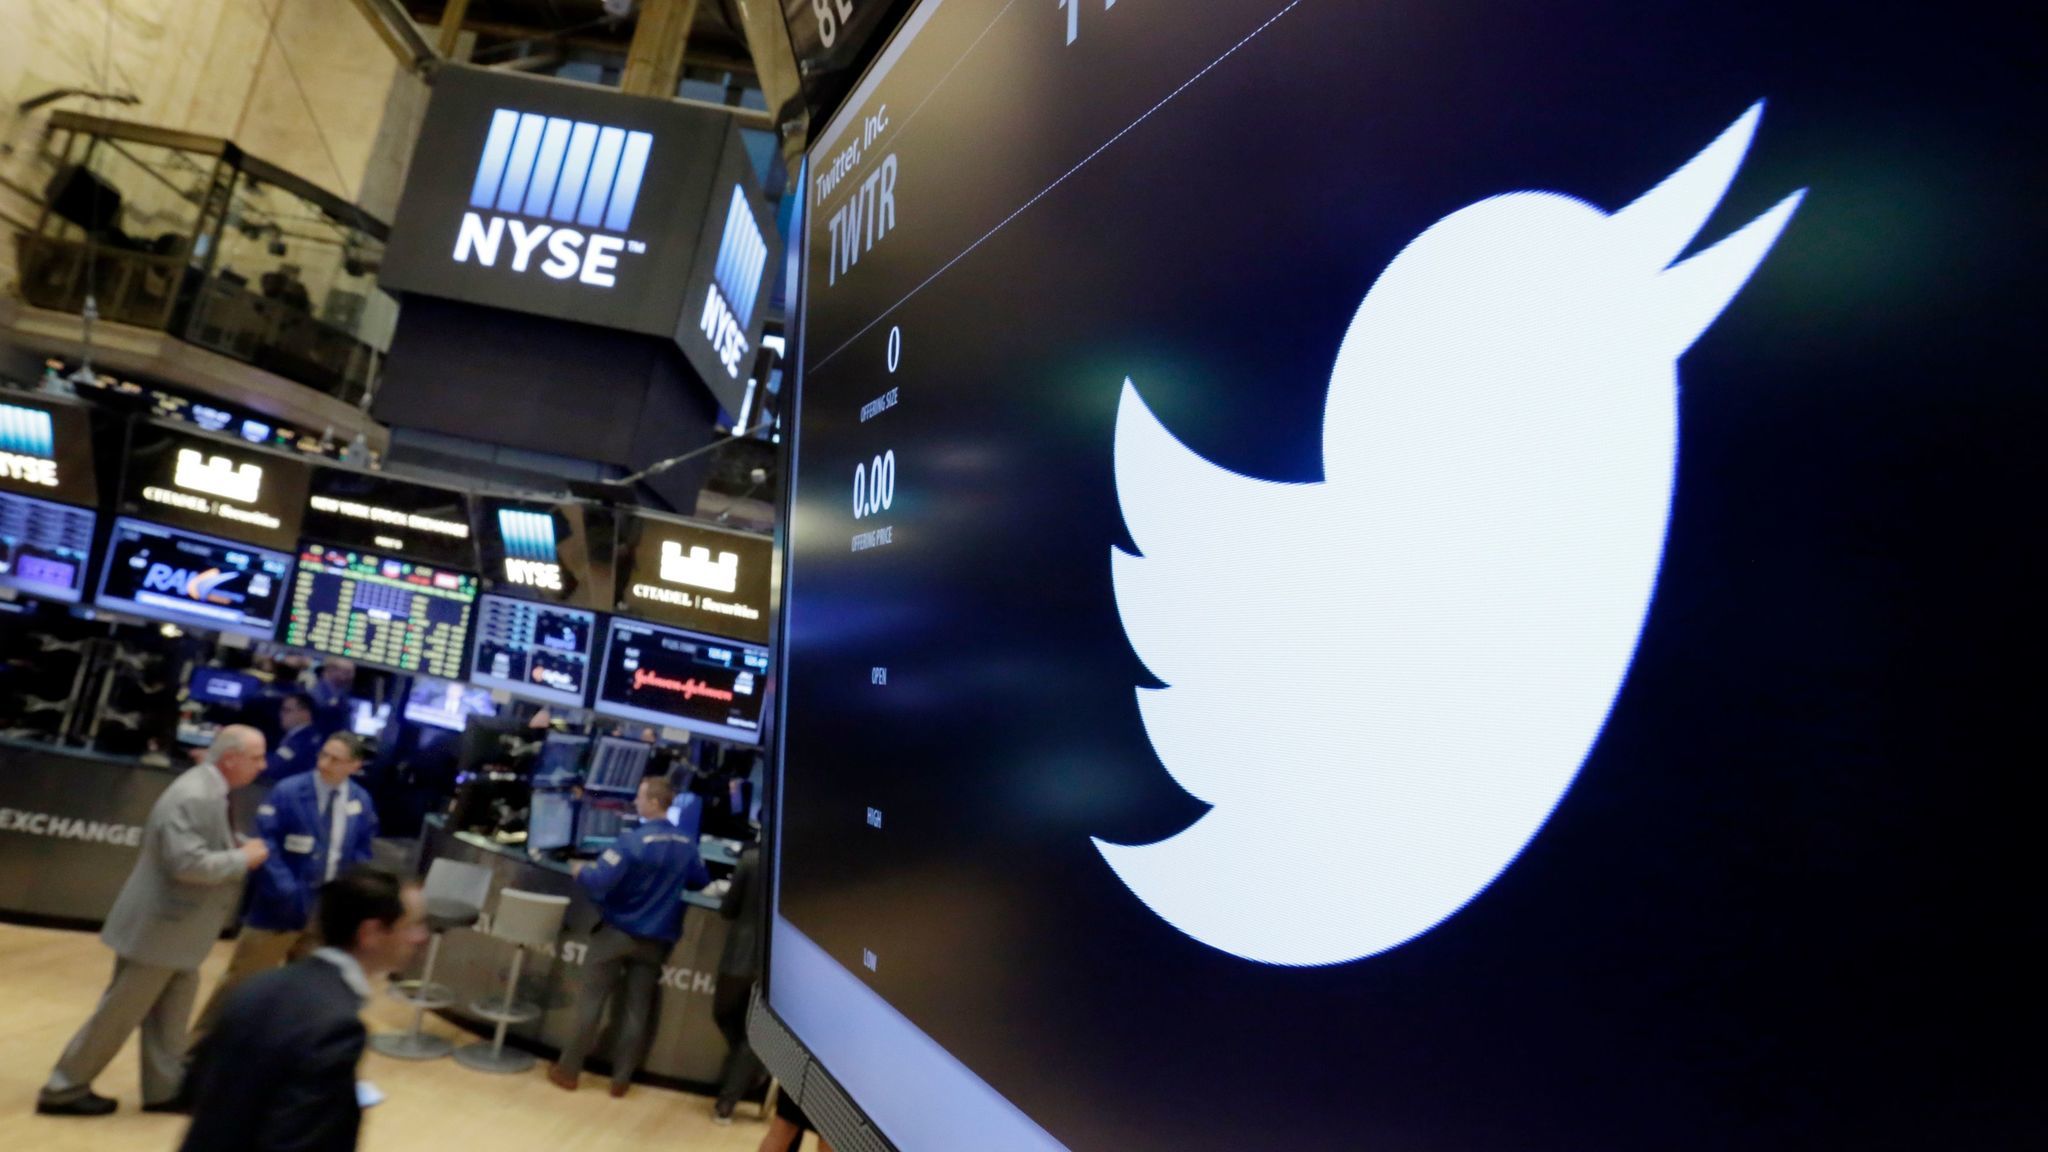 Twitter was one of numerous well-known companies hit by a cyber attack on Oct. 21. The others included Netflix, Spotify, Airbnb, PayPaland HBO.